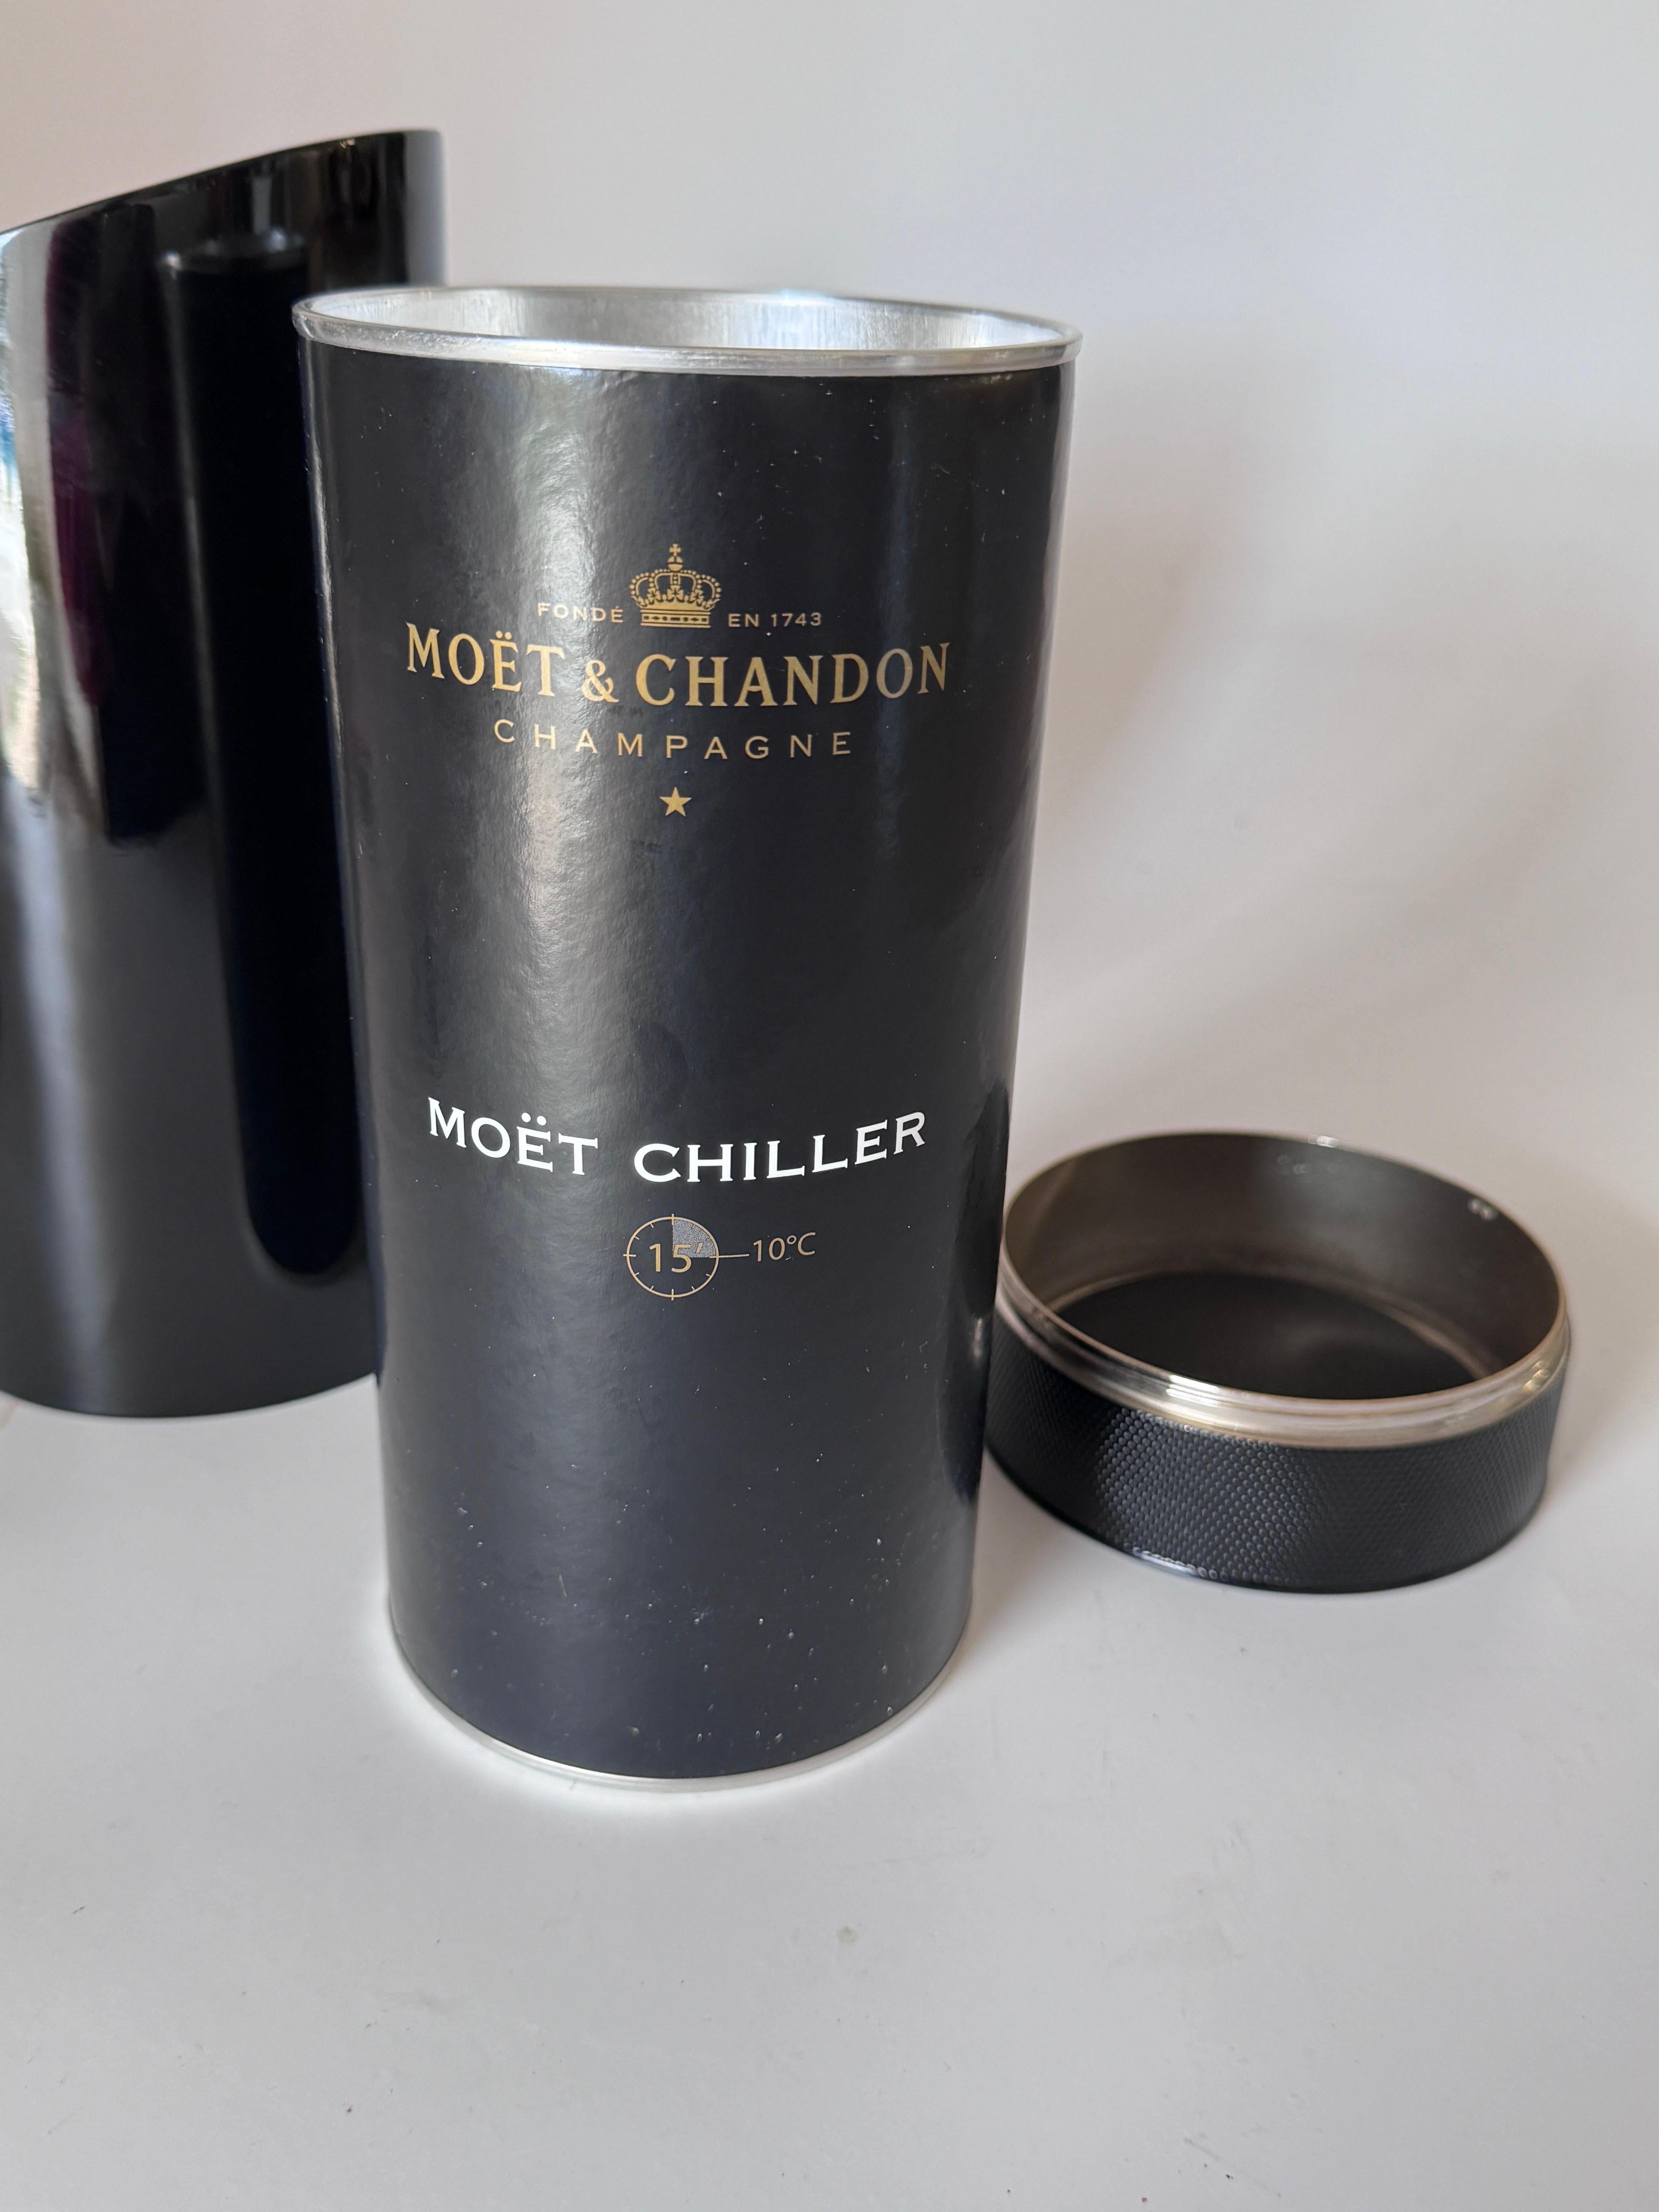 Moët & Chandon Champagne Bucket Metal Black and White Color by Jean Marc Gady In Good Condition For Sale In Auribeau sur Siagne, FR